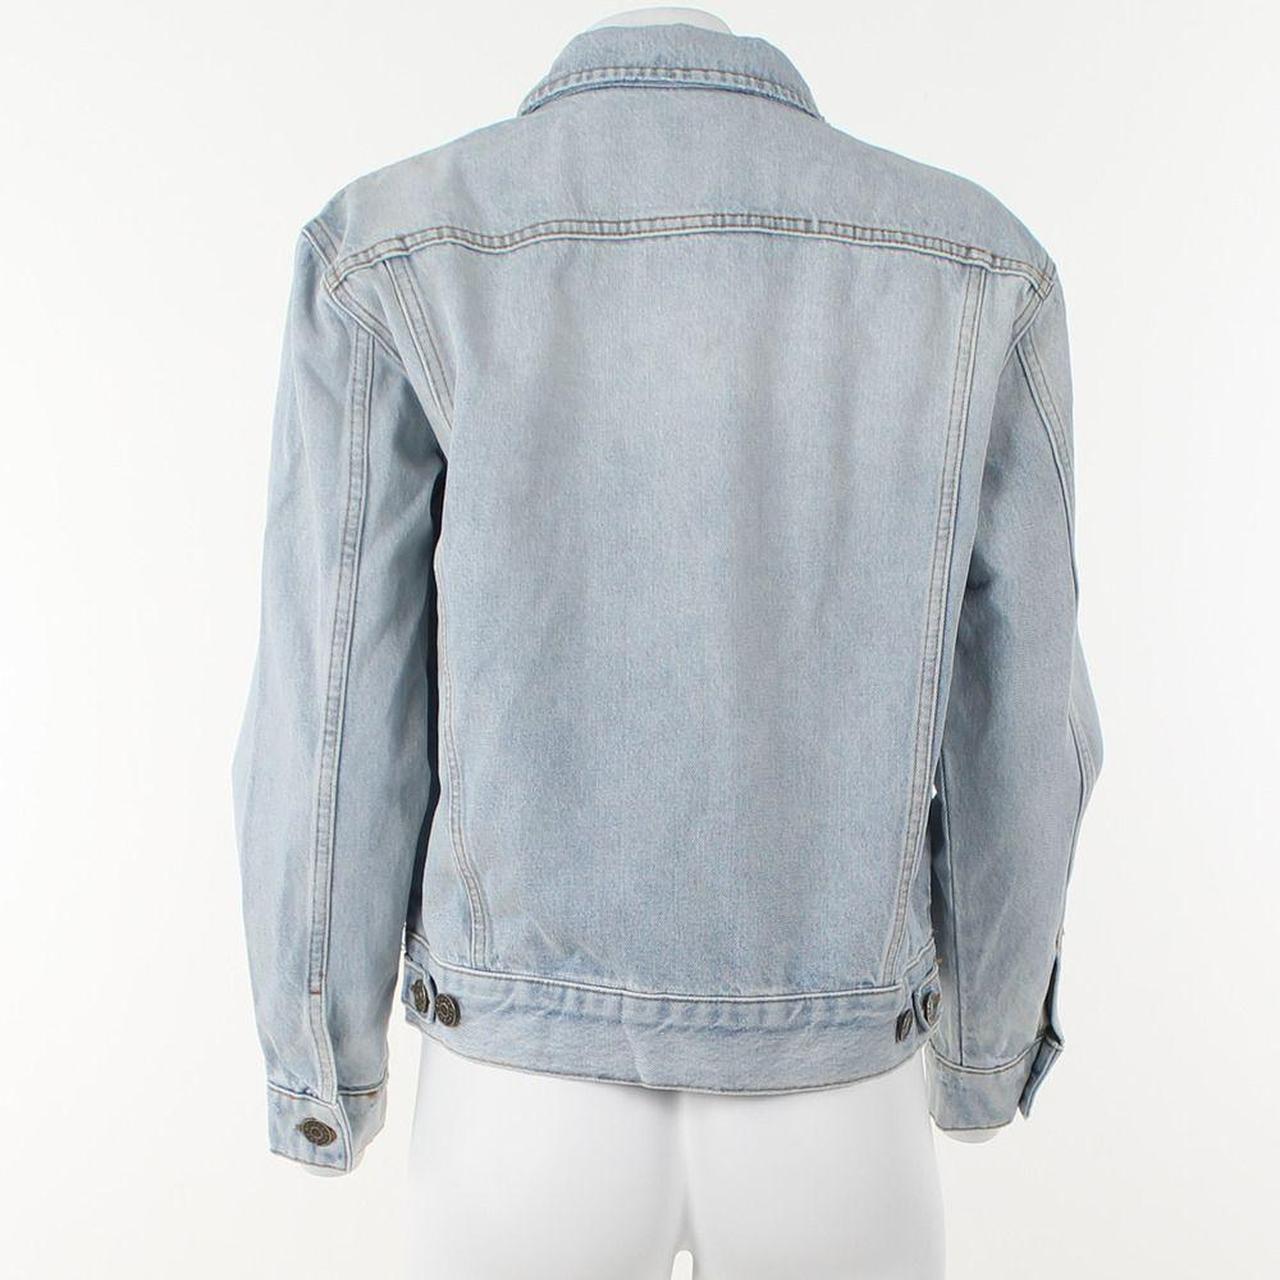 Product Image 3 - Made from bleached-out nonstretch denim,